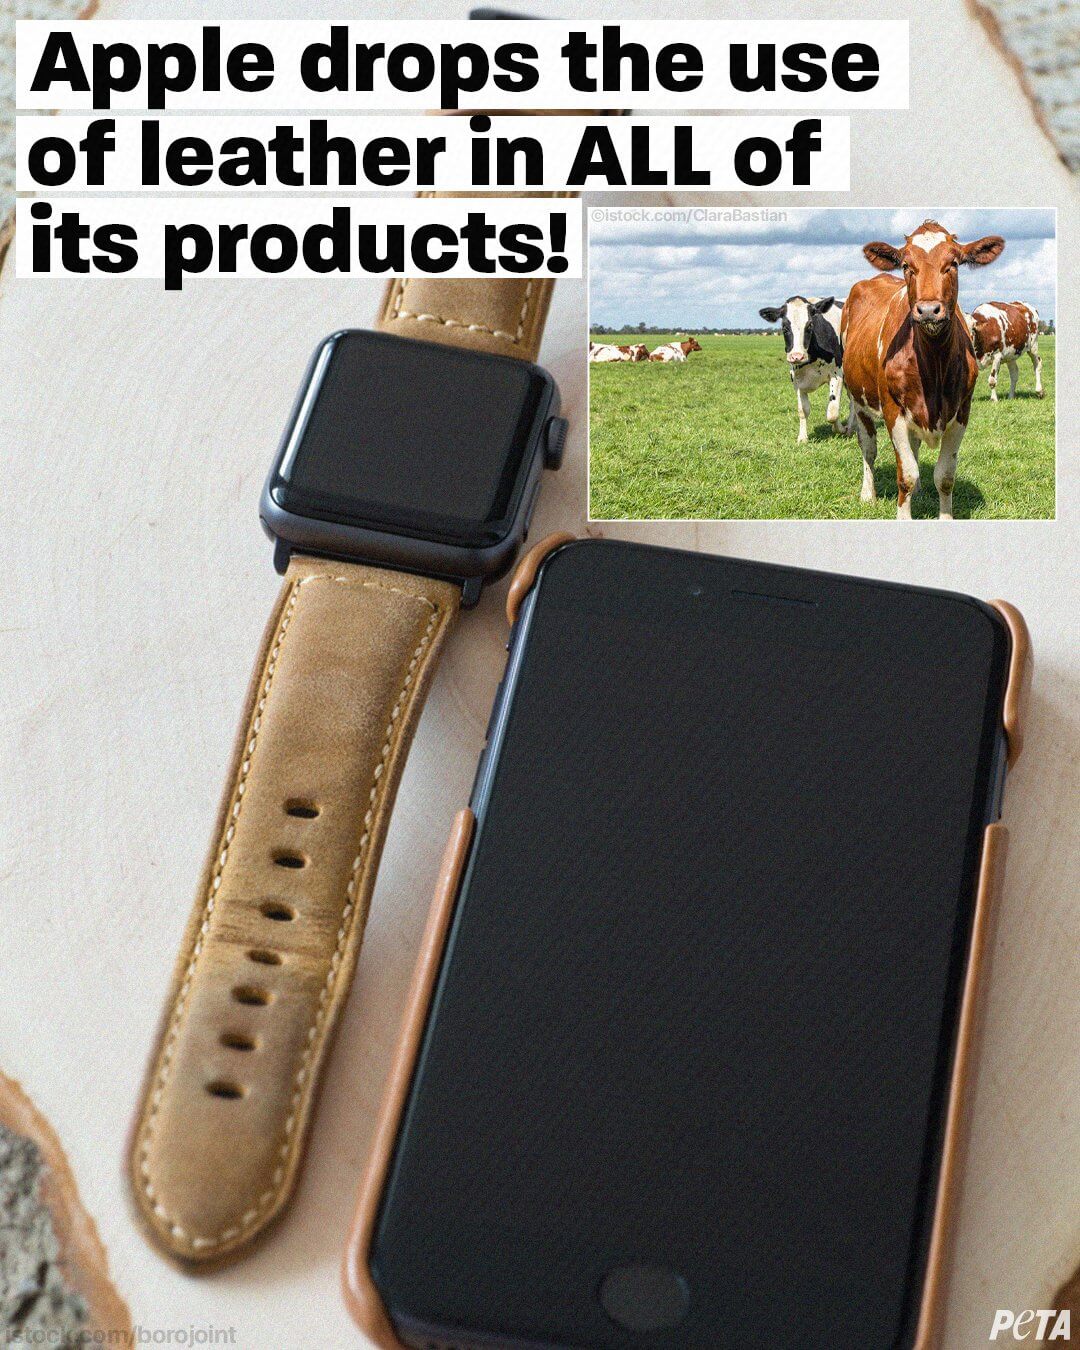 Apple Watch and iPhone with a photo of cows in a field in the right hand corner displaying the message that Apple stopped using leather